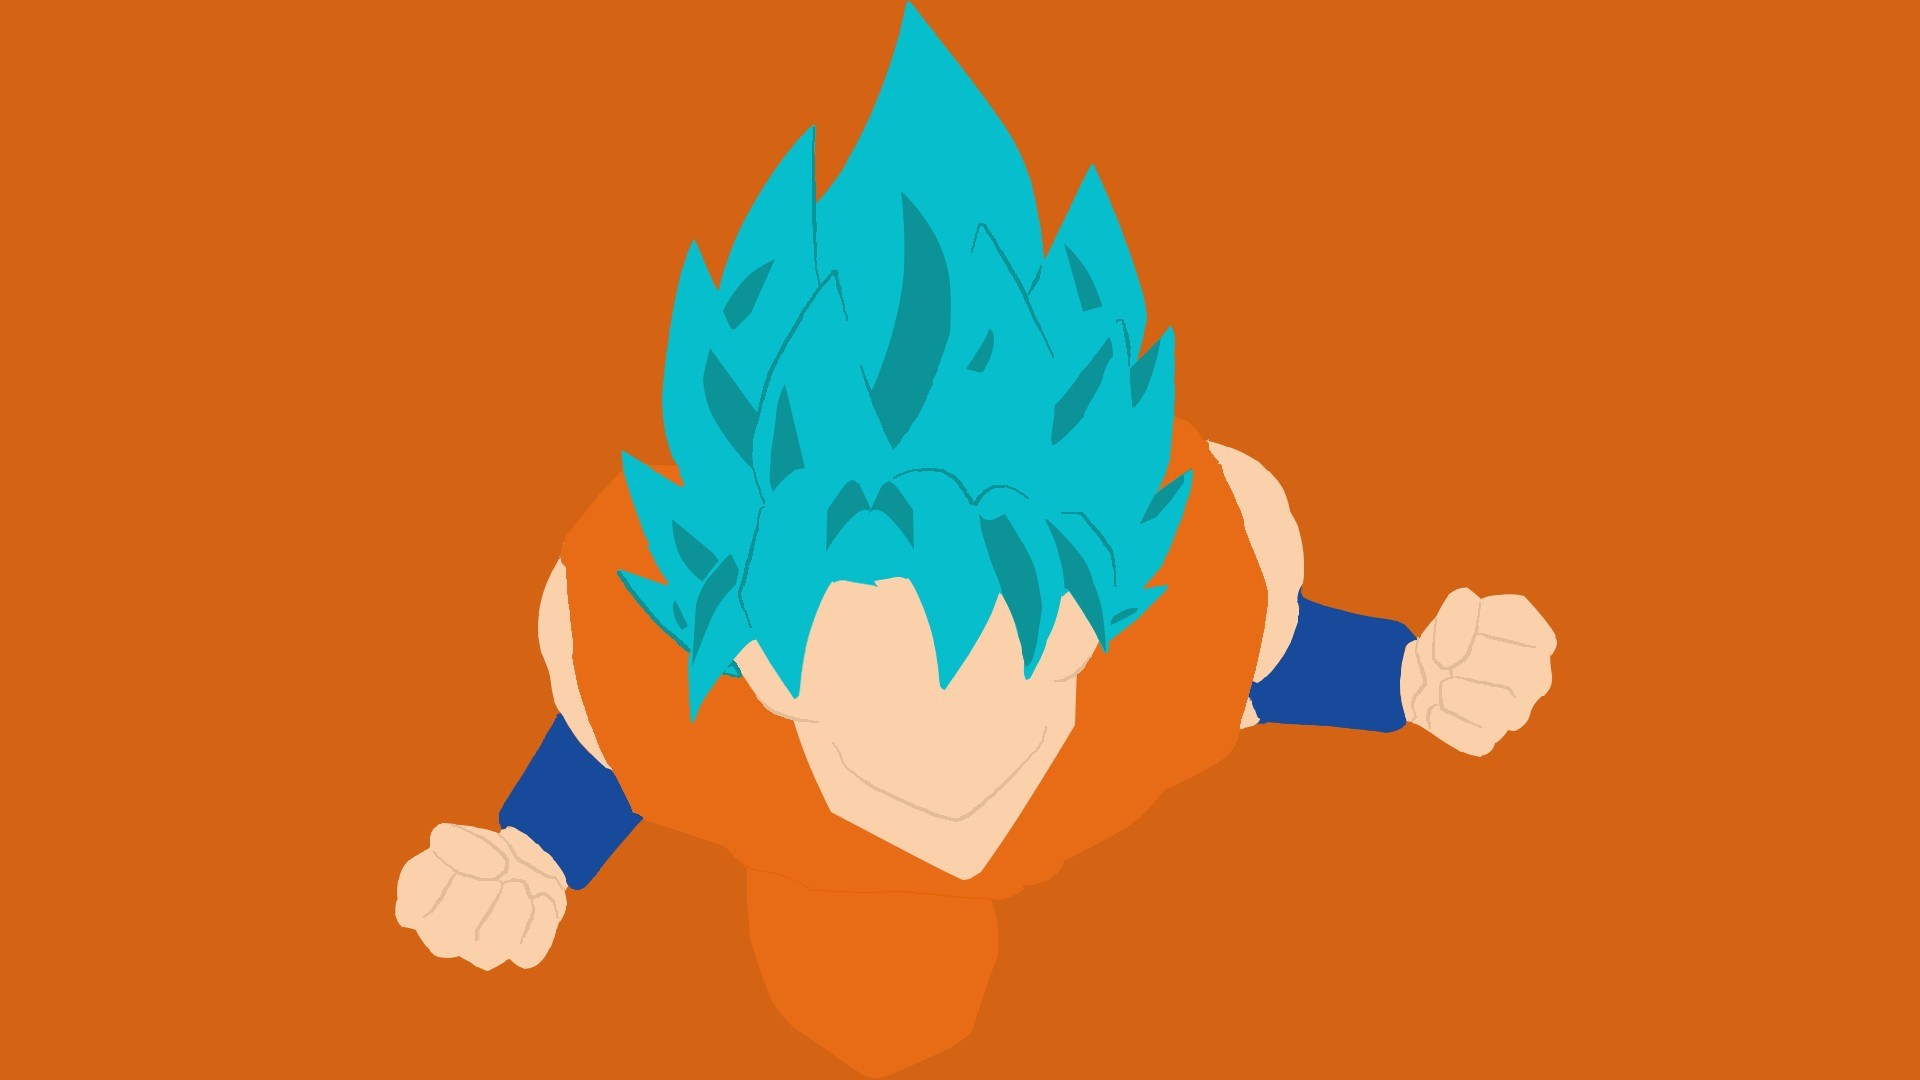 Wallpapers Goku SSJ Blue with image resolution 1920x1080 pixel. You can make this wallpaper for your Desktop Computer Backgrounds, Mac Wallpapers, Android Lock screen or iPhone Screensavers